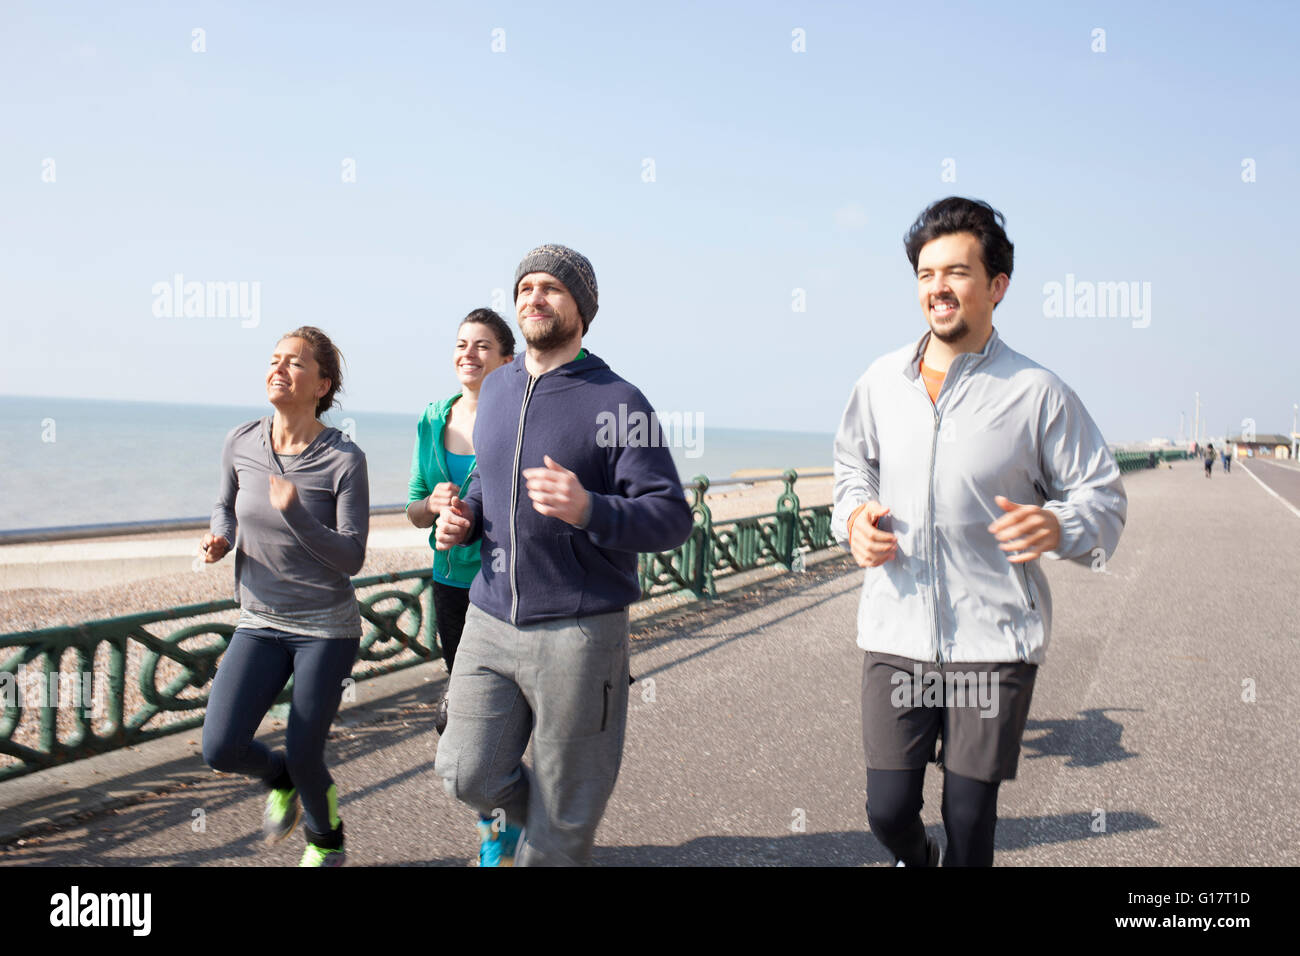 Male and female runners running together at Brighton beach Stock Photo